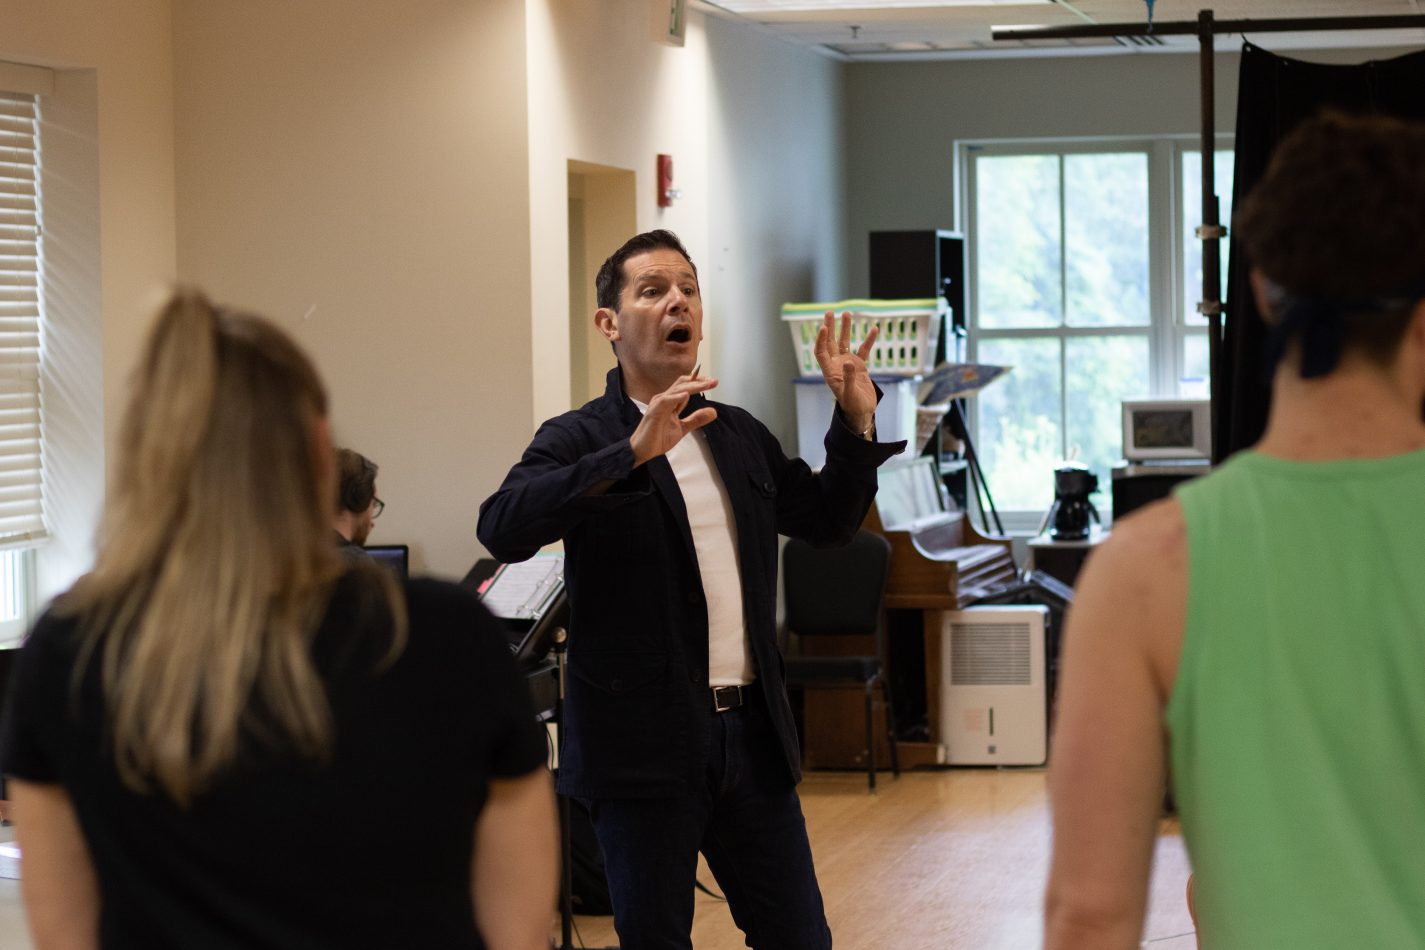 Director Peter Flynn in rehearsal with the young ensemble cast of “Roald Dahl’s Matilda the Musical” at Olney Theatre Center.